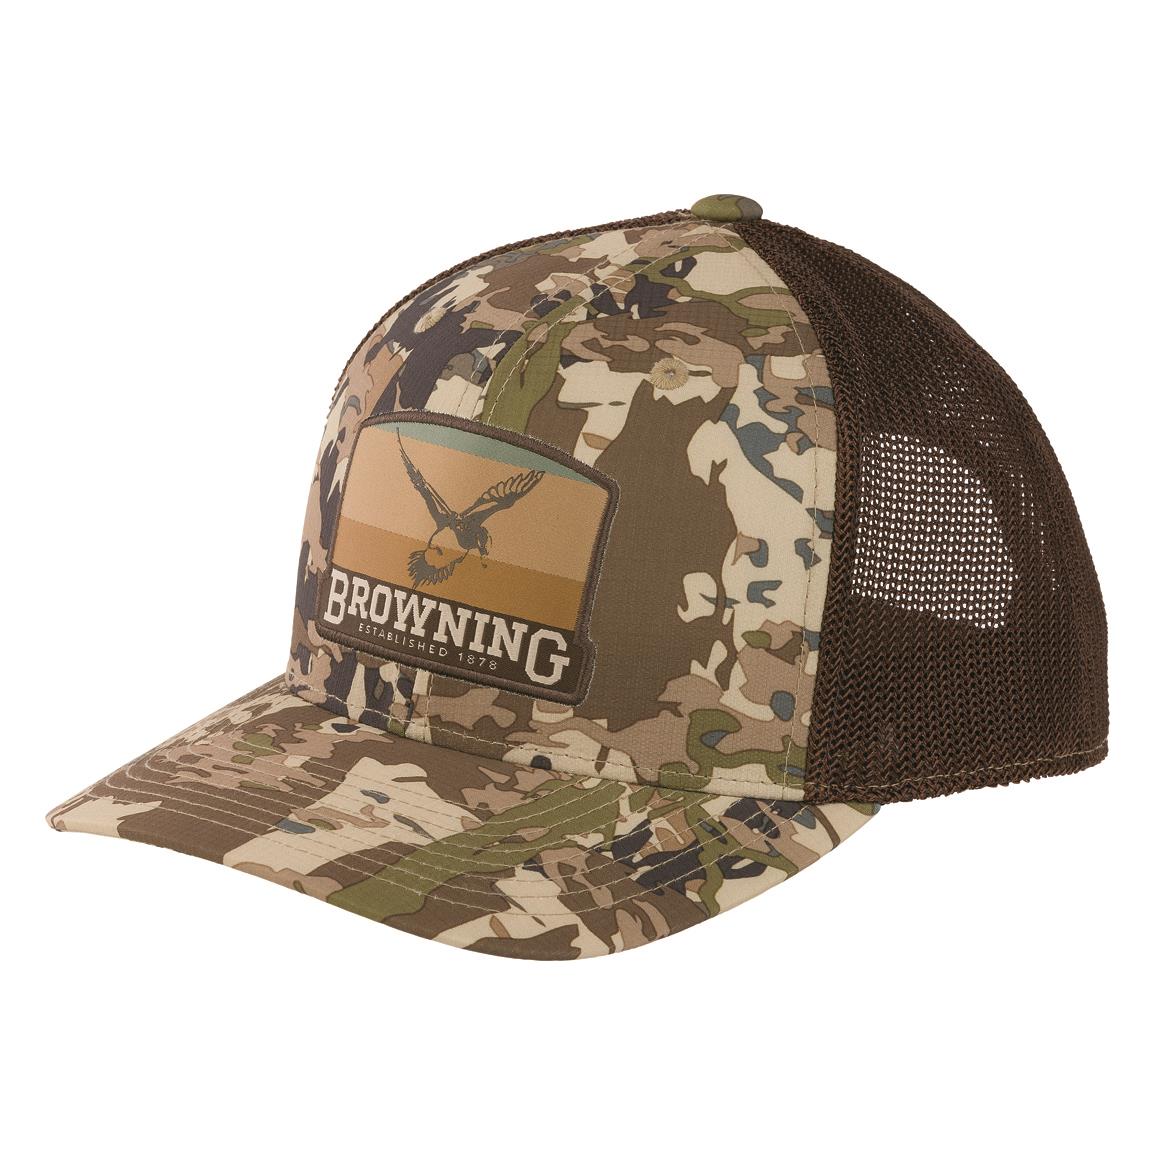 Browning River Pines Cap, Auric